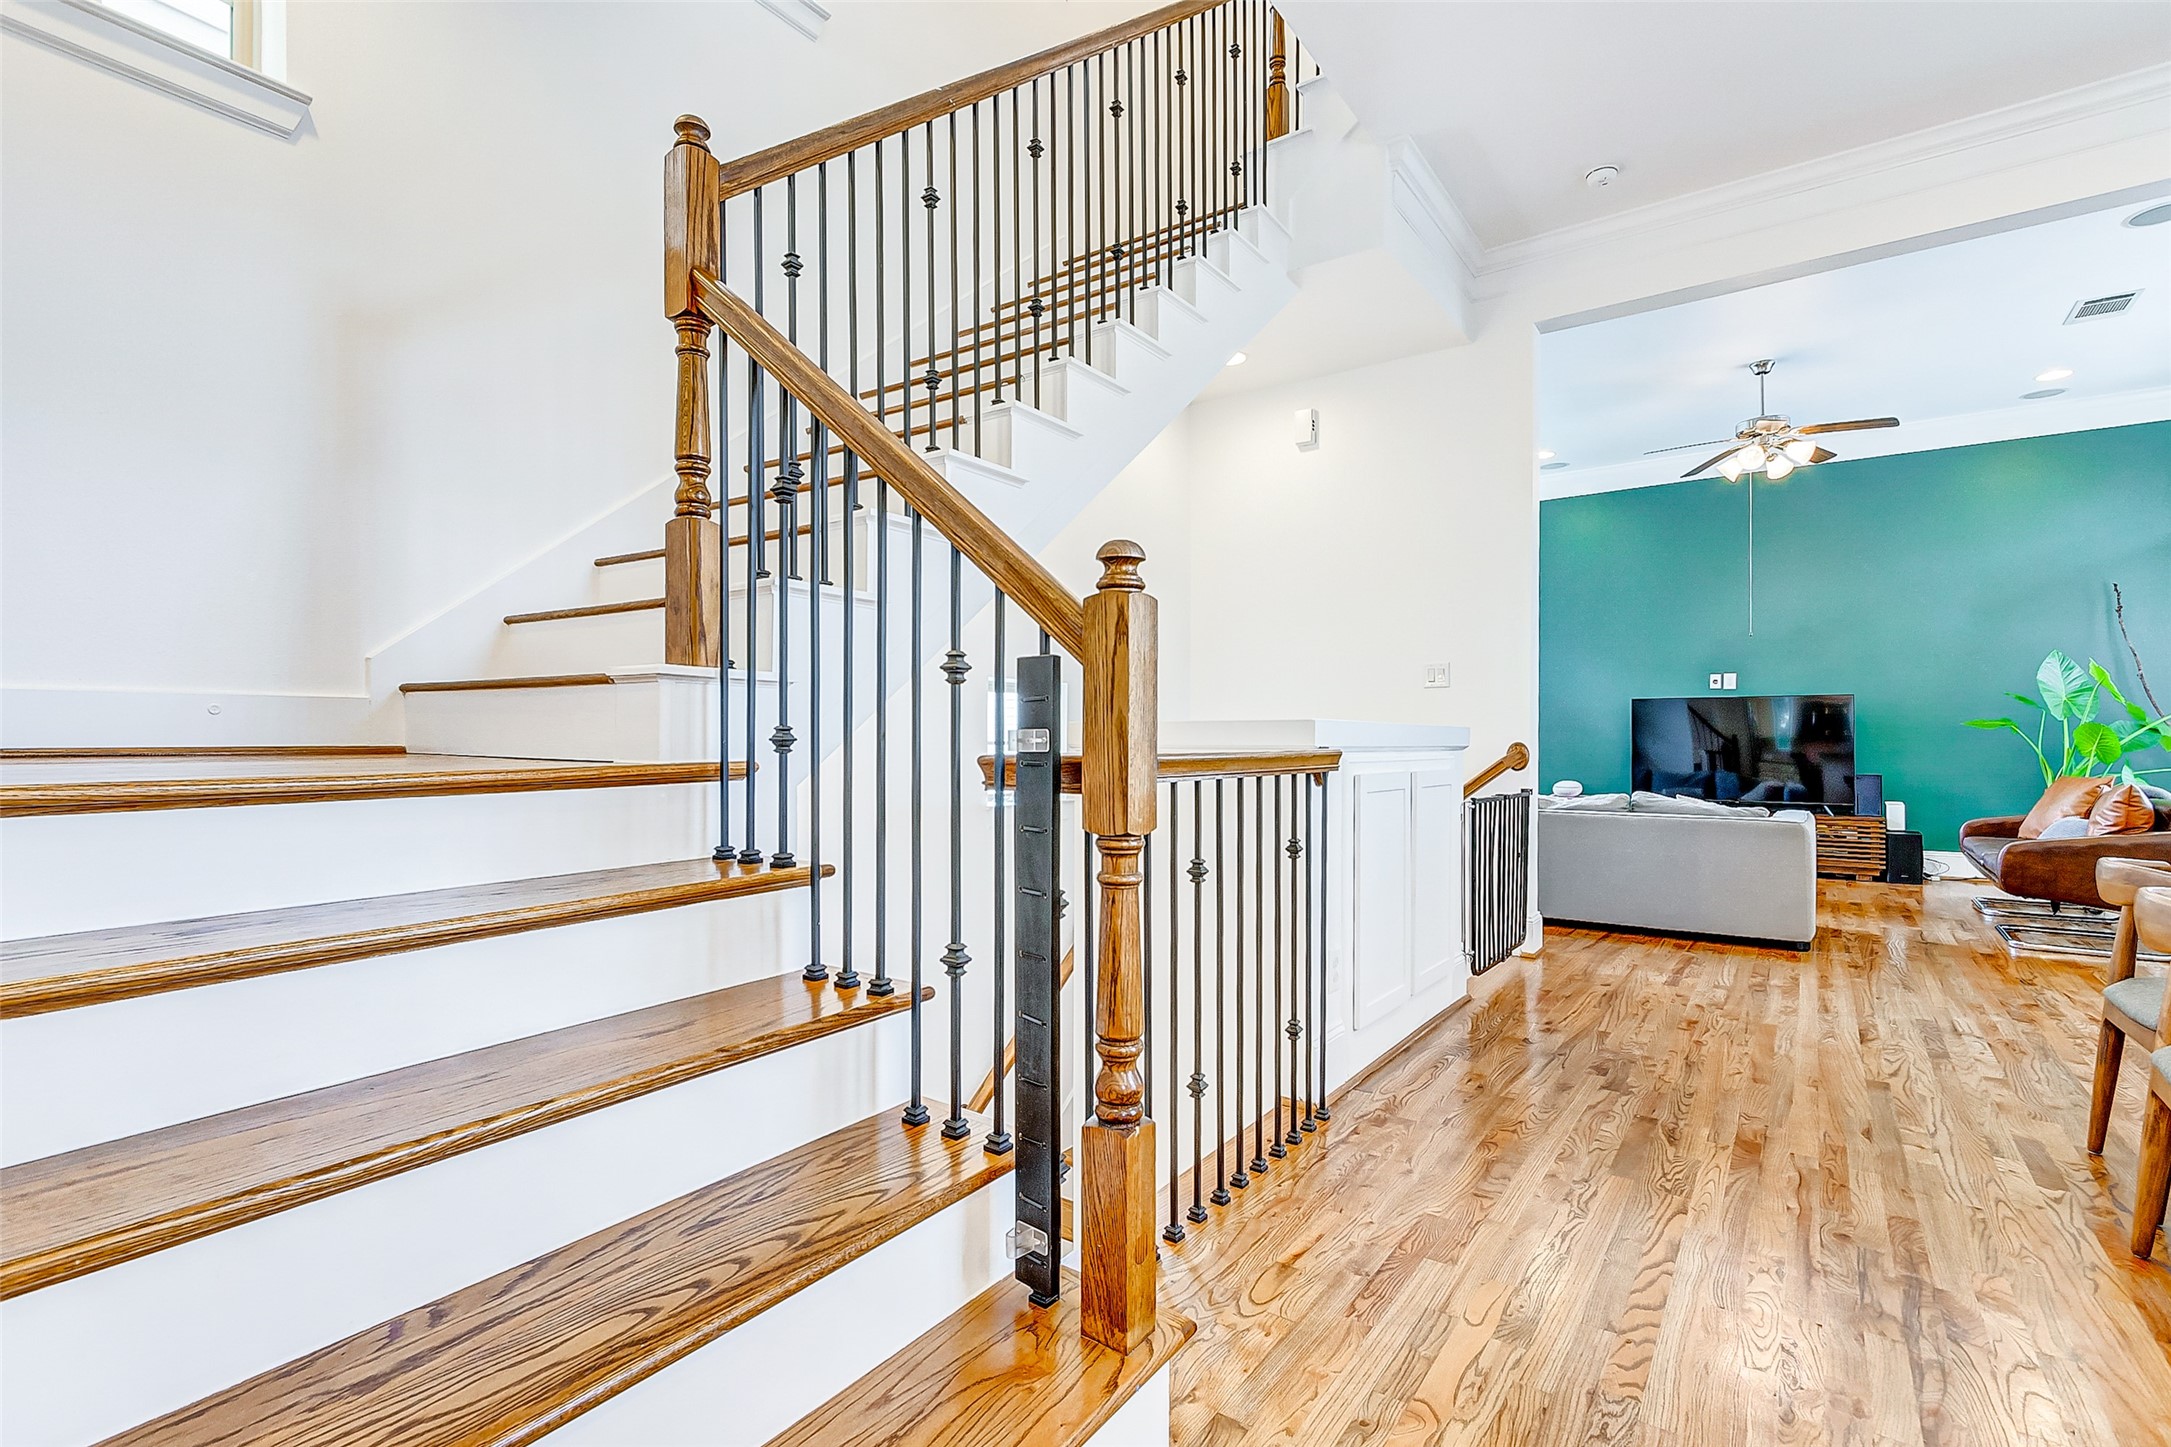 Easily access the Primary Ensuite, secondary bedroom, and utility room from the kitchen, dining room, and living room by climbing the beautiful iron spindled staircase to the third floor.